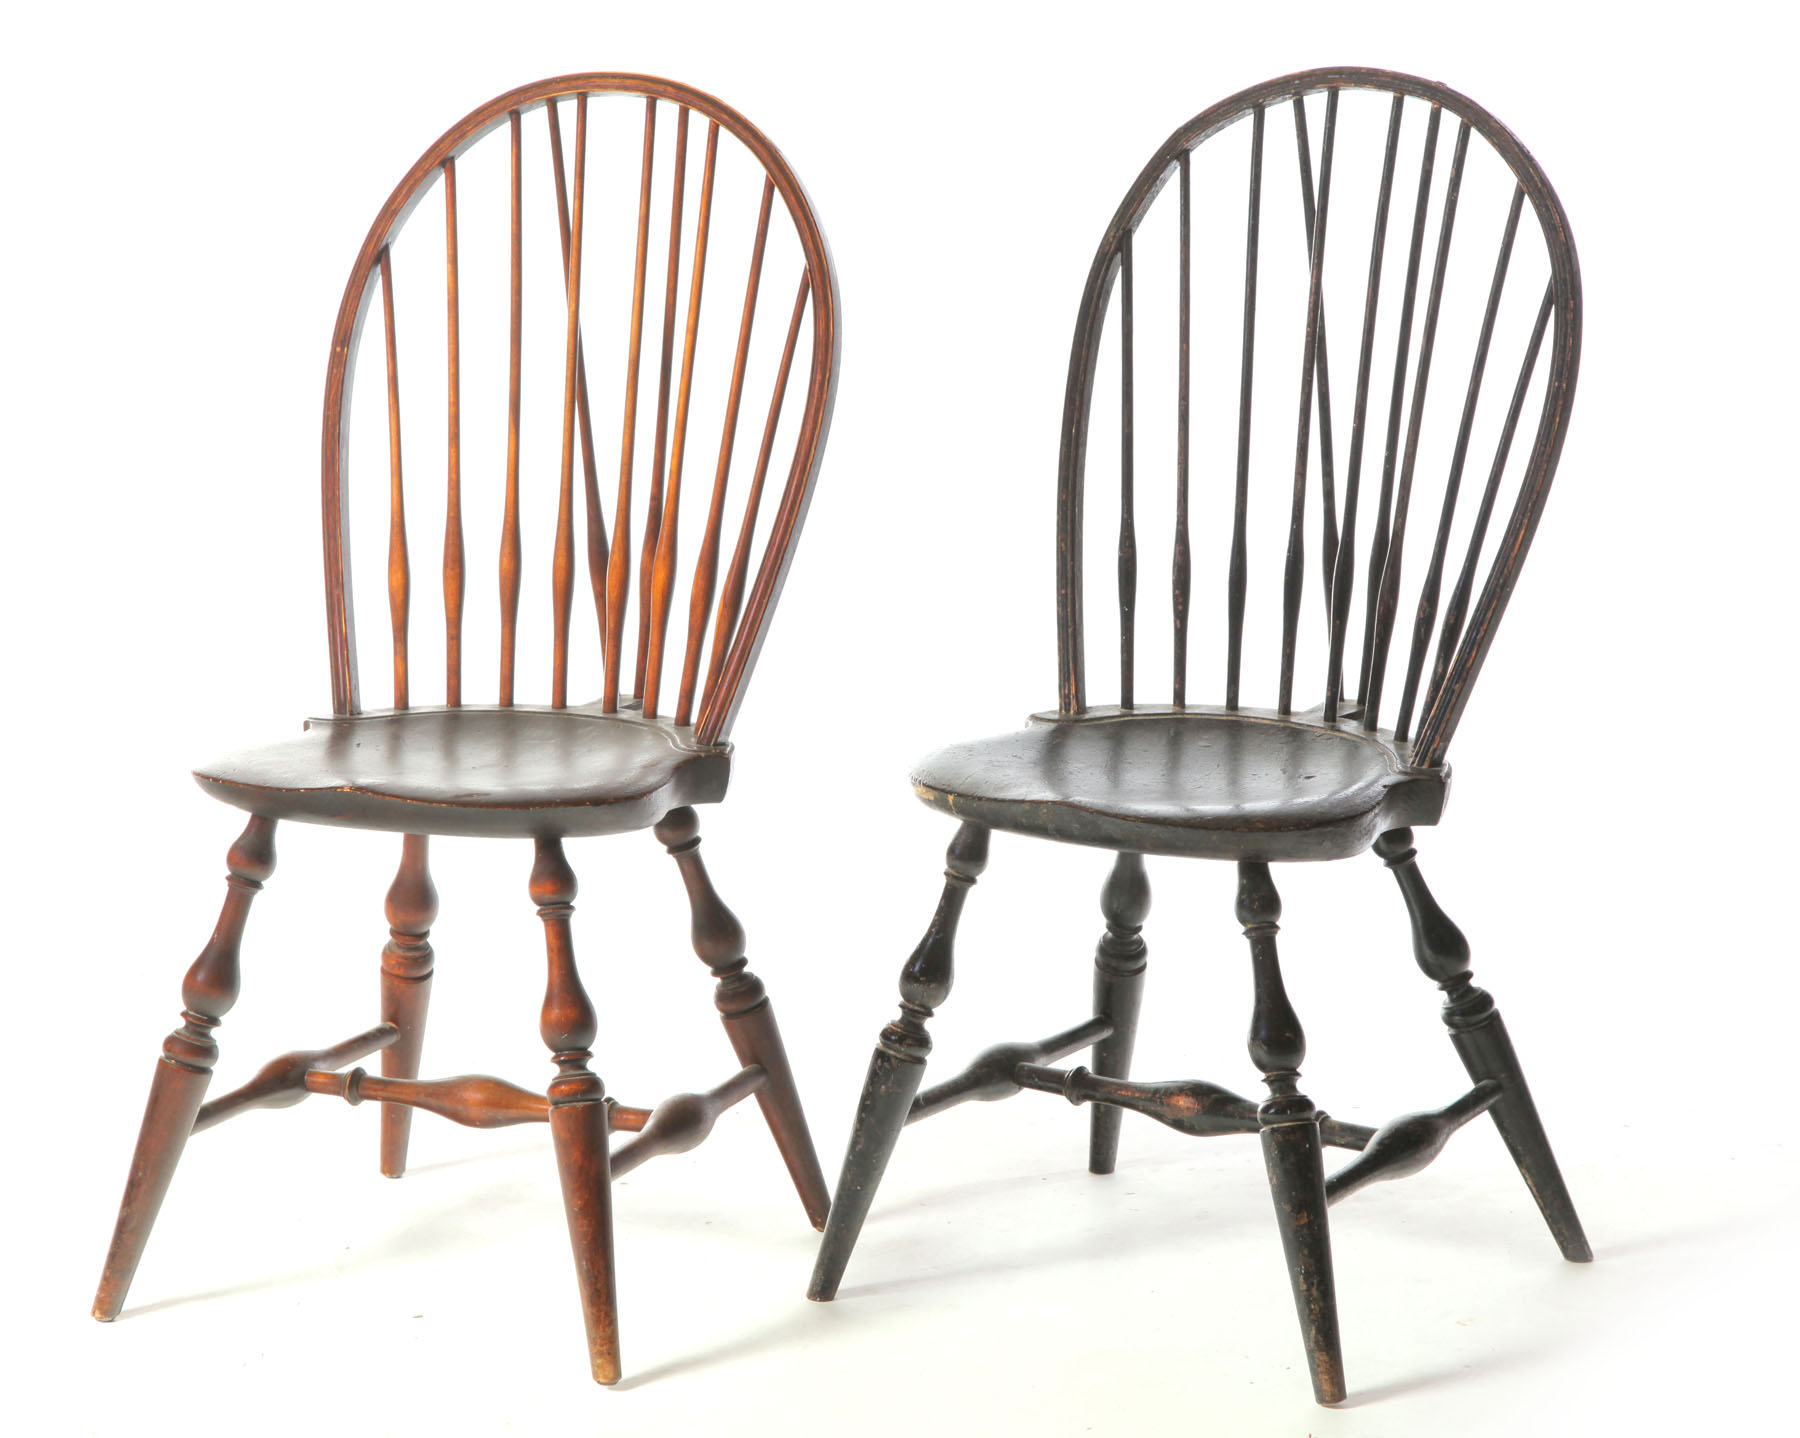 PAIR OF BRACE BACK WINDSOR CHAIRS  123970